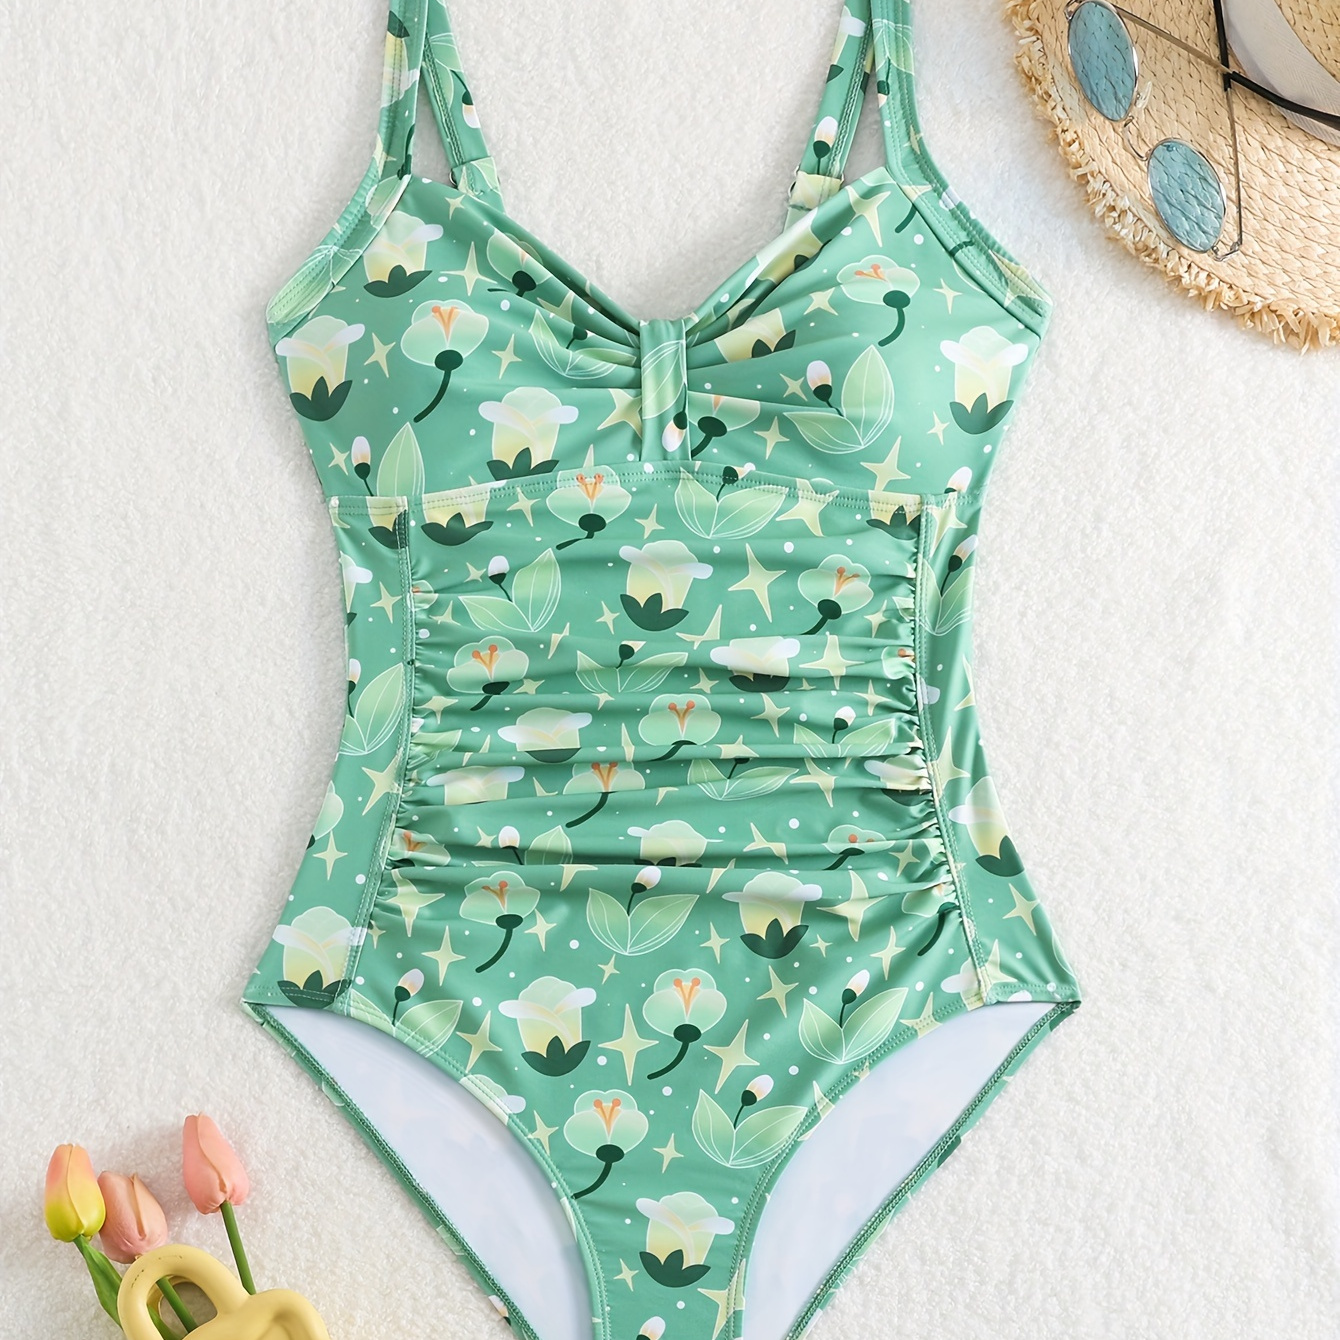 

Women's One-piece Swimsuit, Sexy Floral Pattern, Adjustable Straps, Summer Beachwear, Quick-dry Fabric